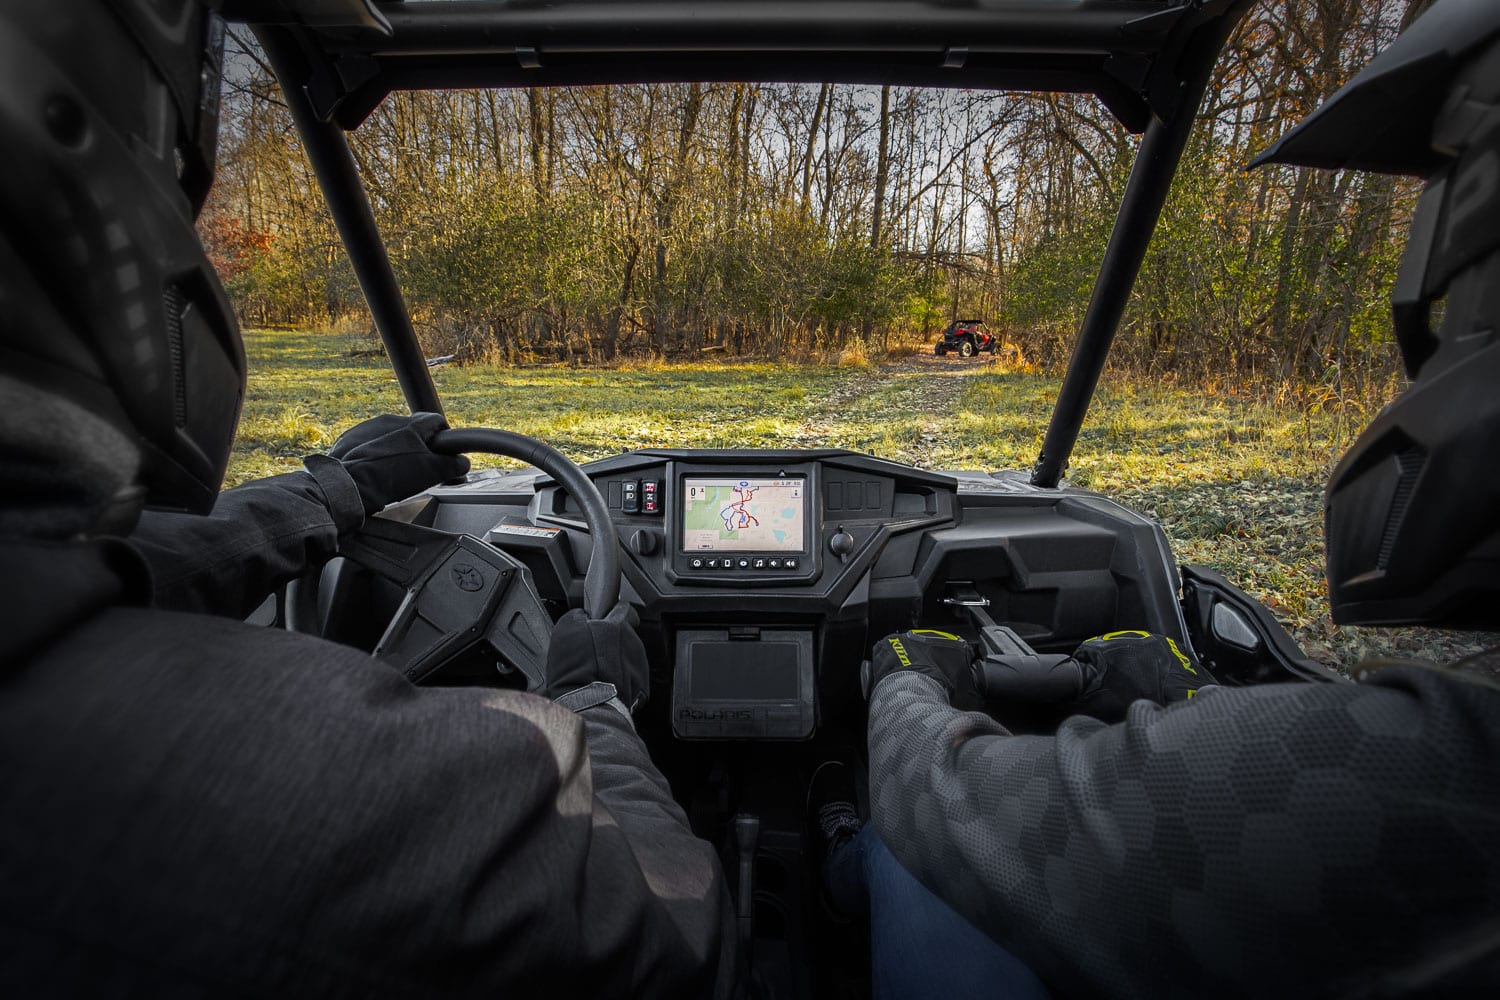 2020 RZR and Sportsman Limited-Edition Models